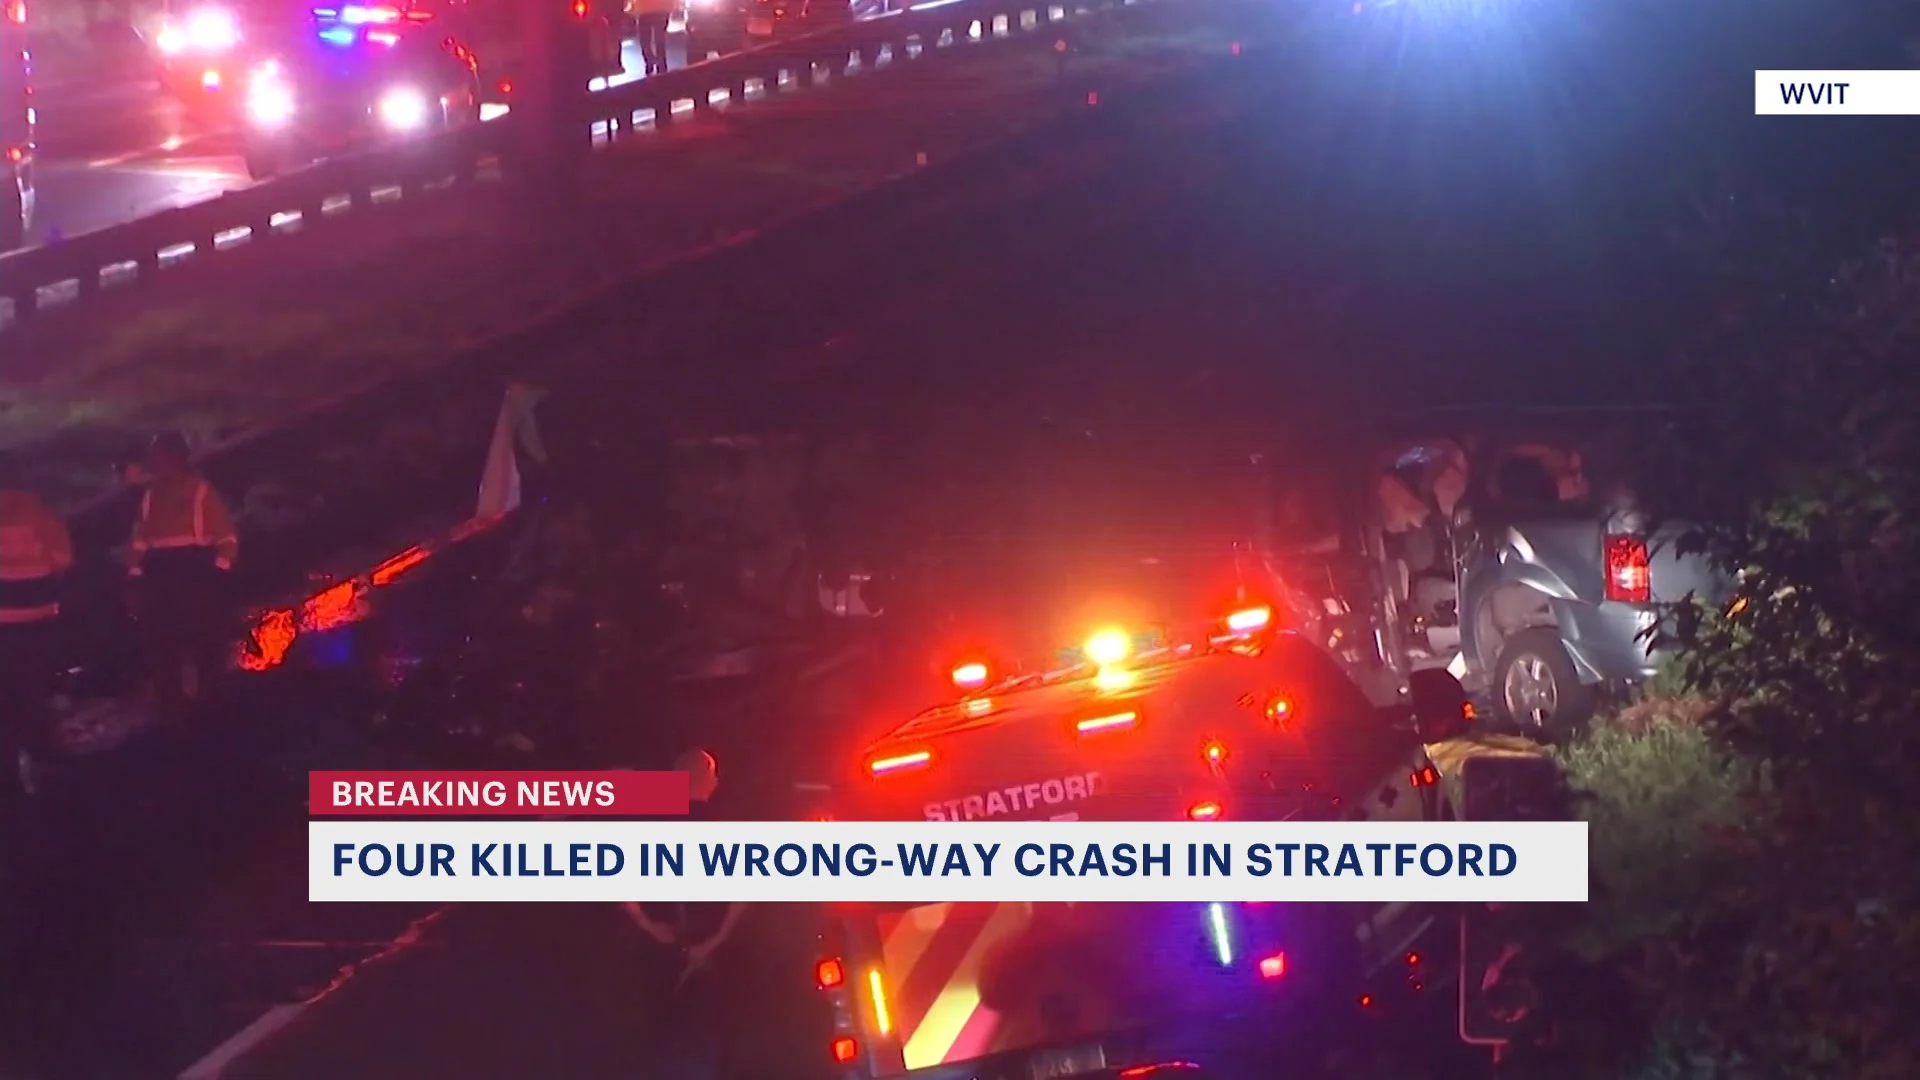 State police: 4 people killed in wrong-way crash on the Merritt Parkway in Stratford